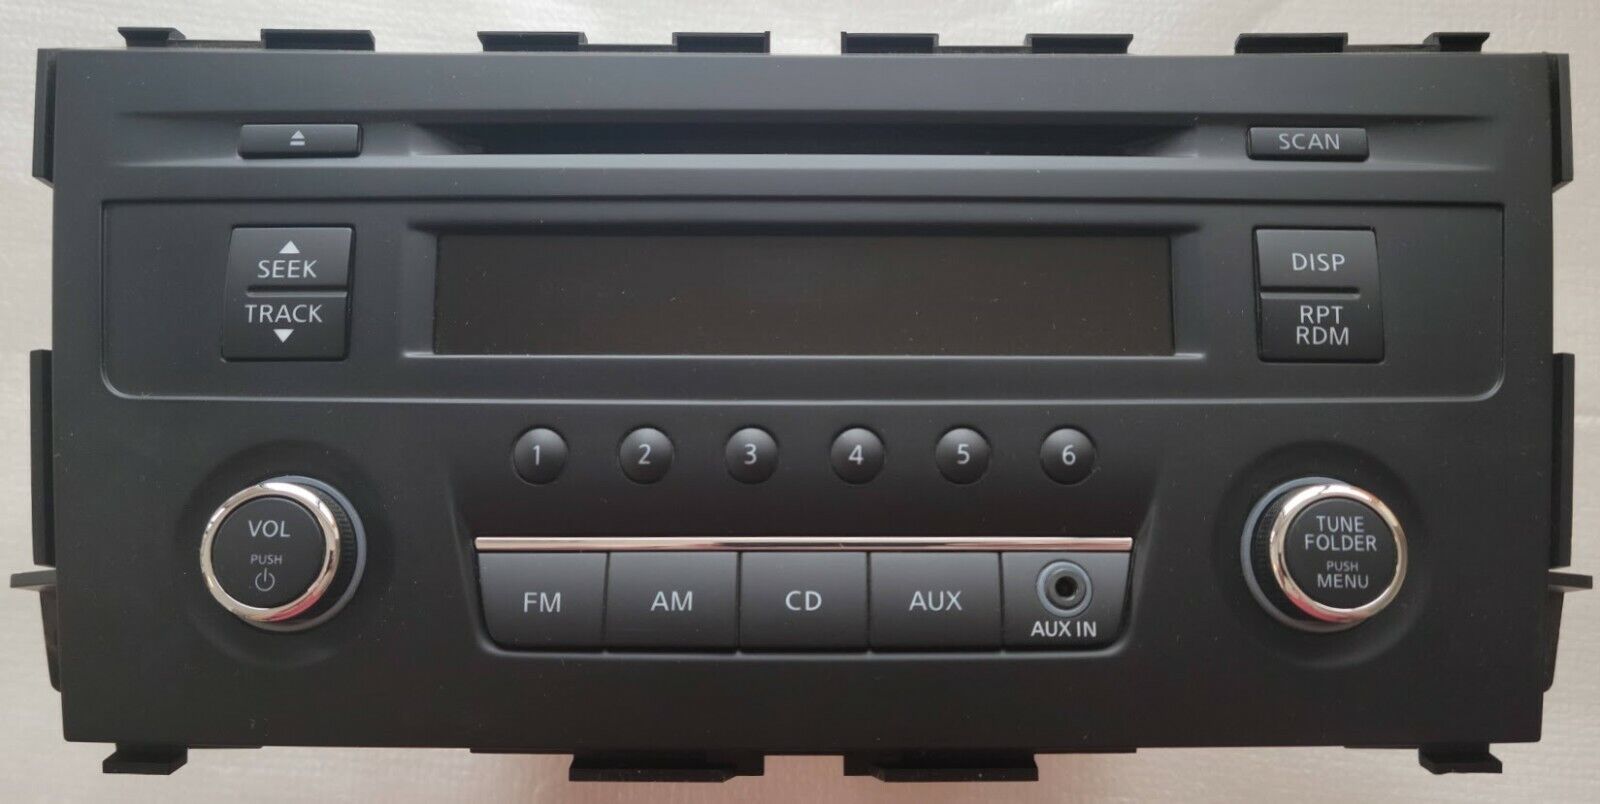 MP3 CD Aux-in radio. OEM factory original stereo for Nissan Altima 2015-2018 - $81.83